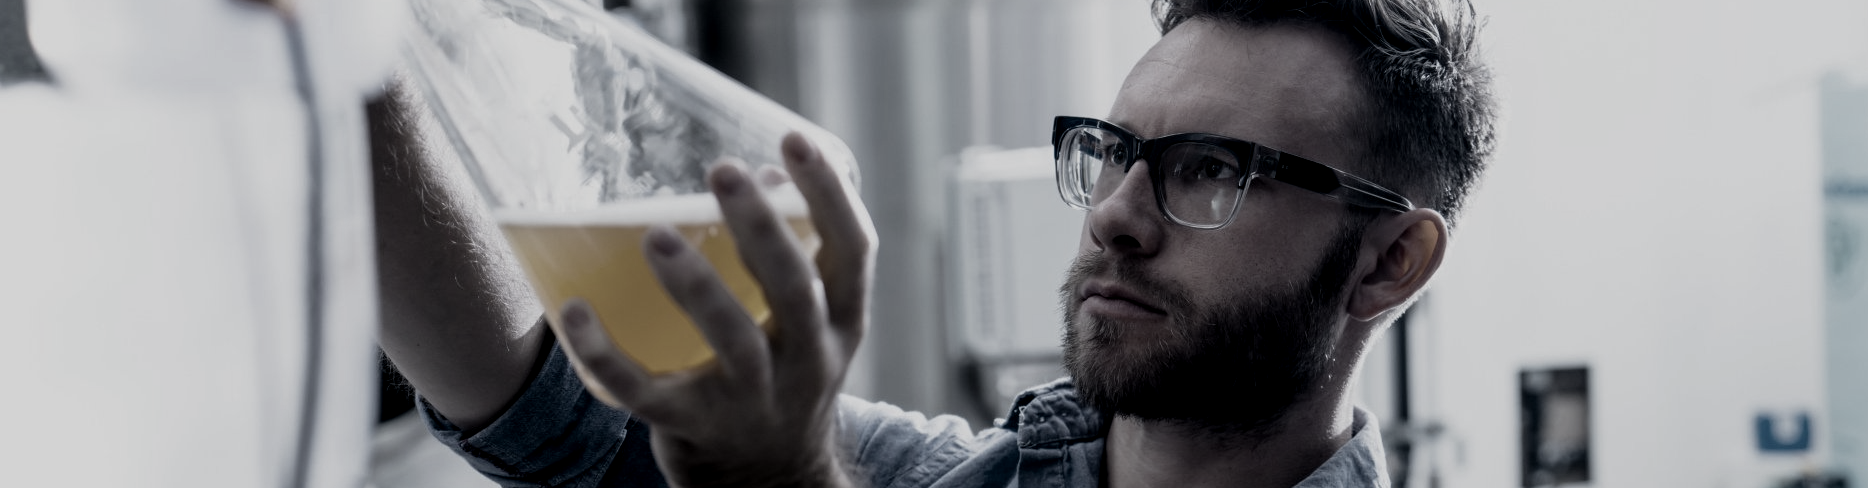 Young man with glasses examines a large beaker of beer.